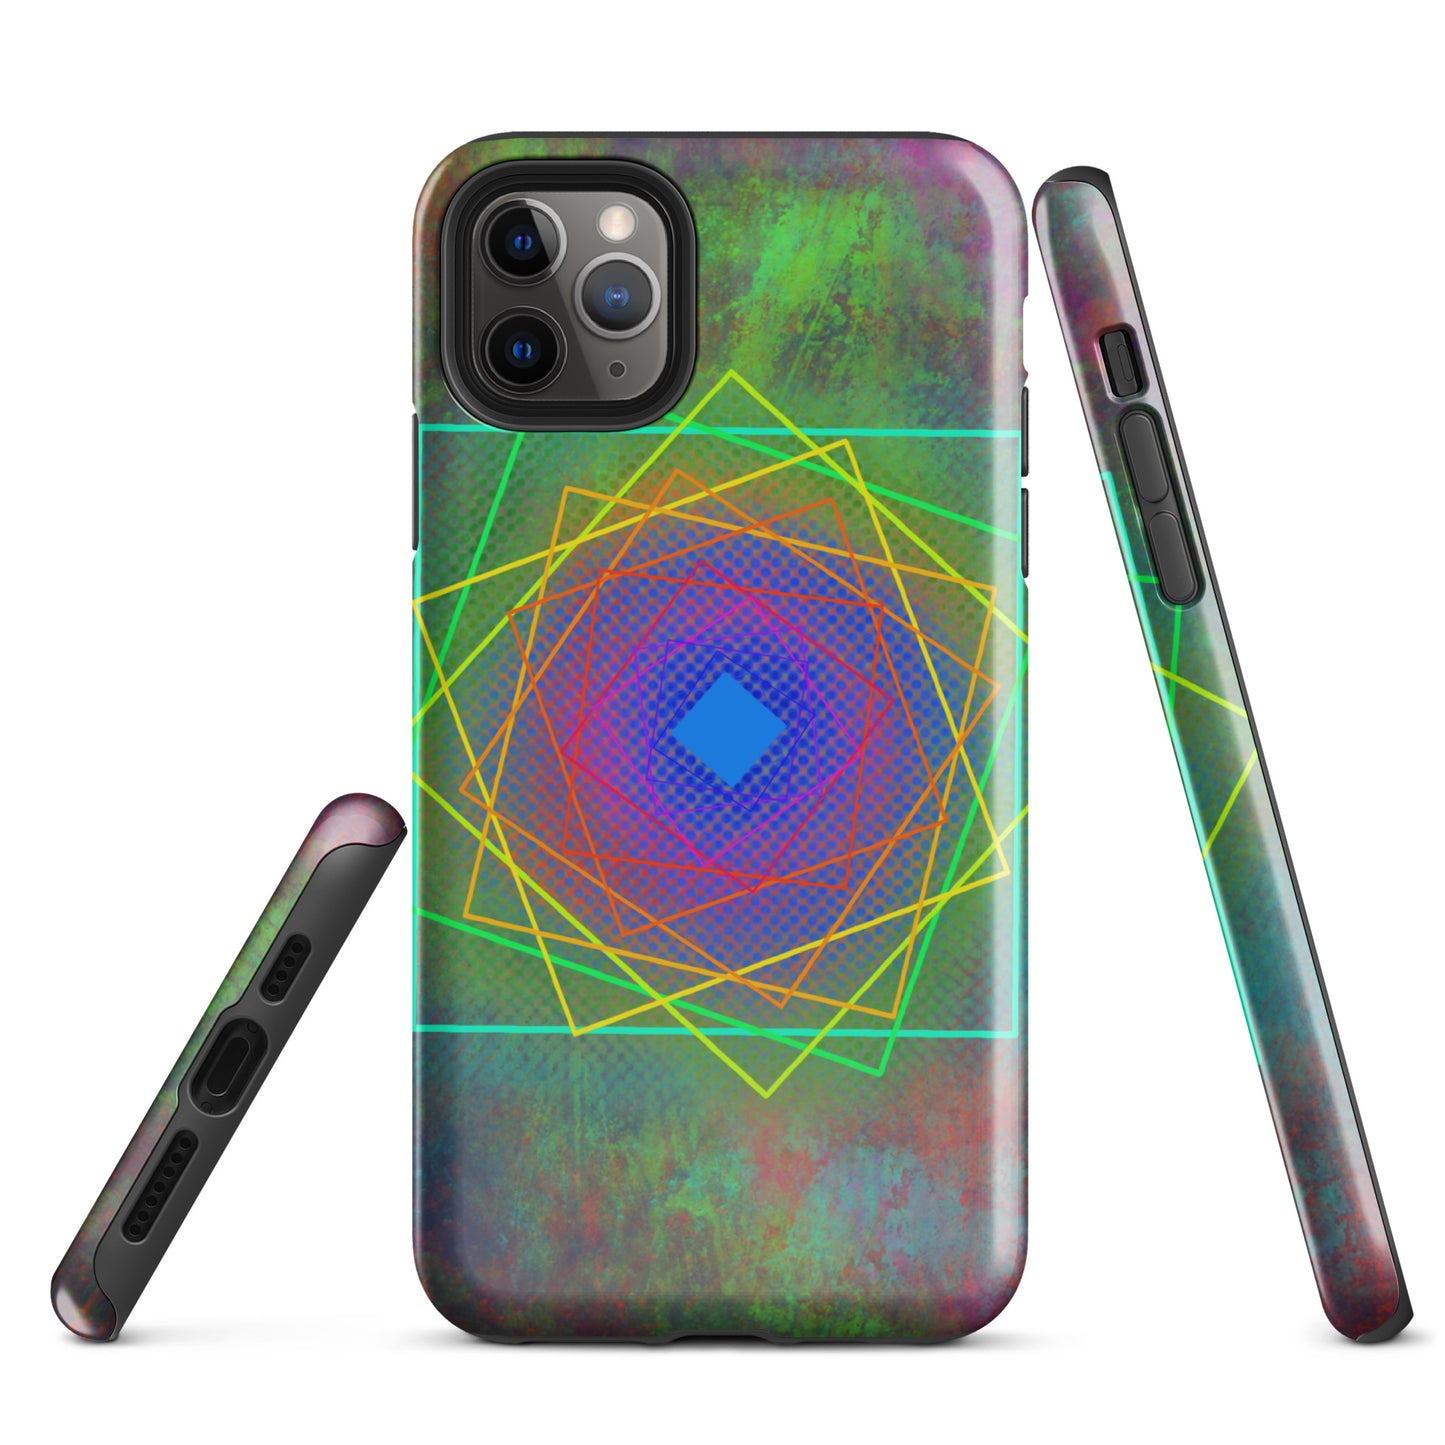 A Colourful Geometric Cubes Case for the iPhone 11 Pro Max